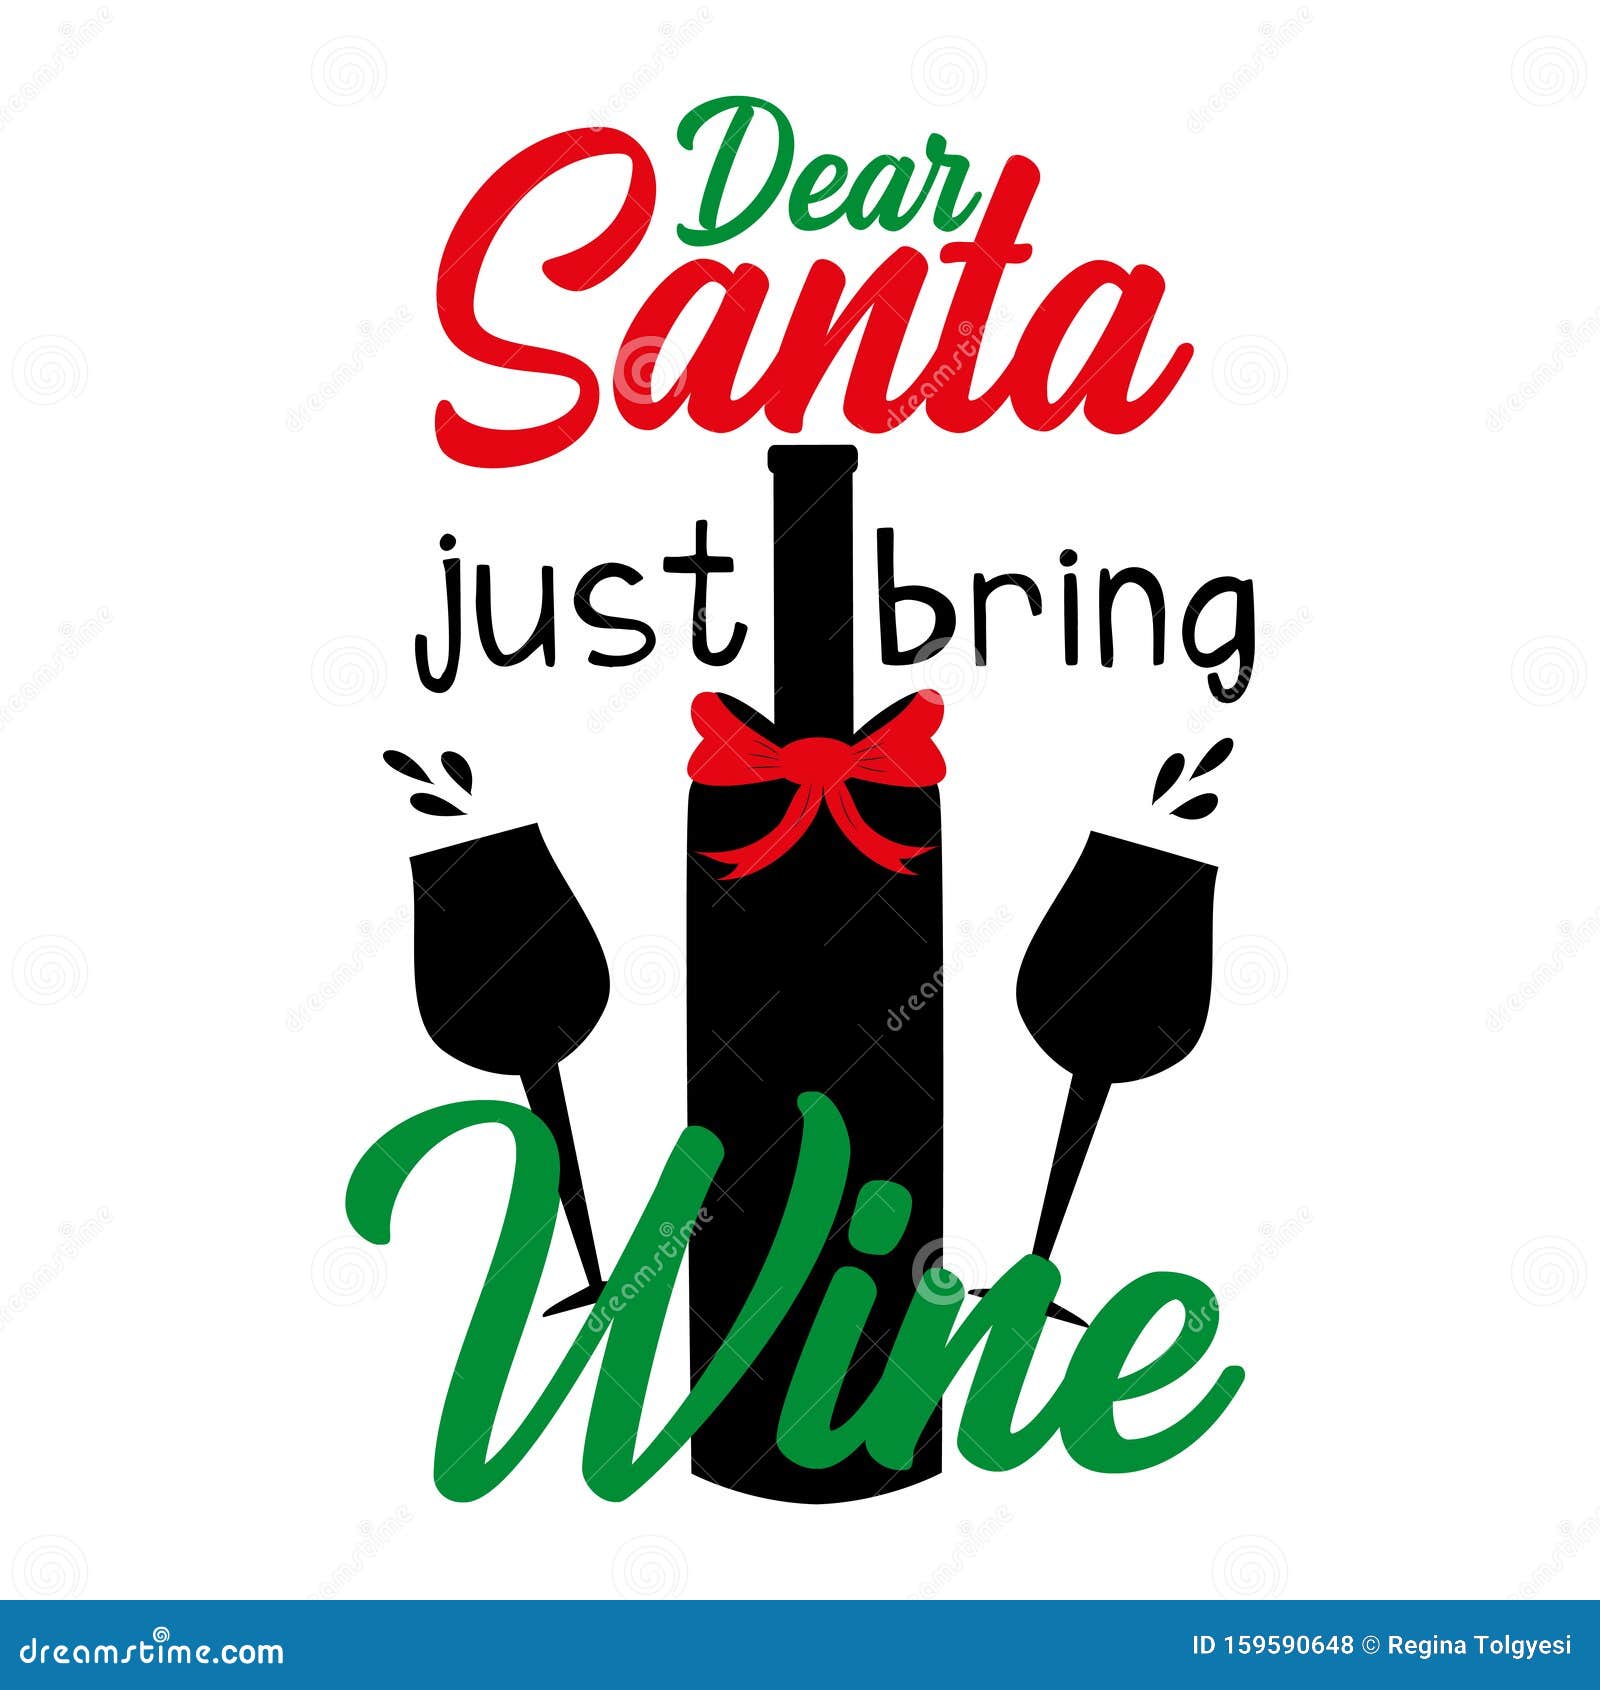 dear santa just bring wine, funny christmas  text with glasses and bottle silhouette.